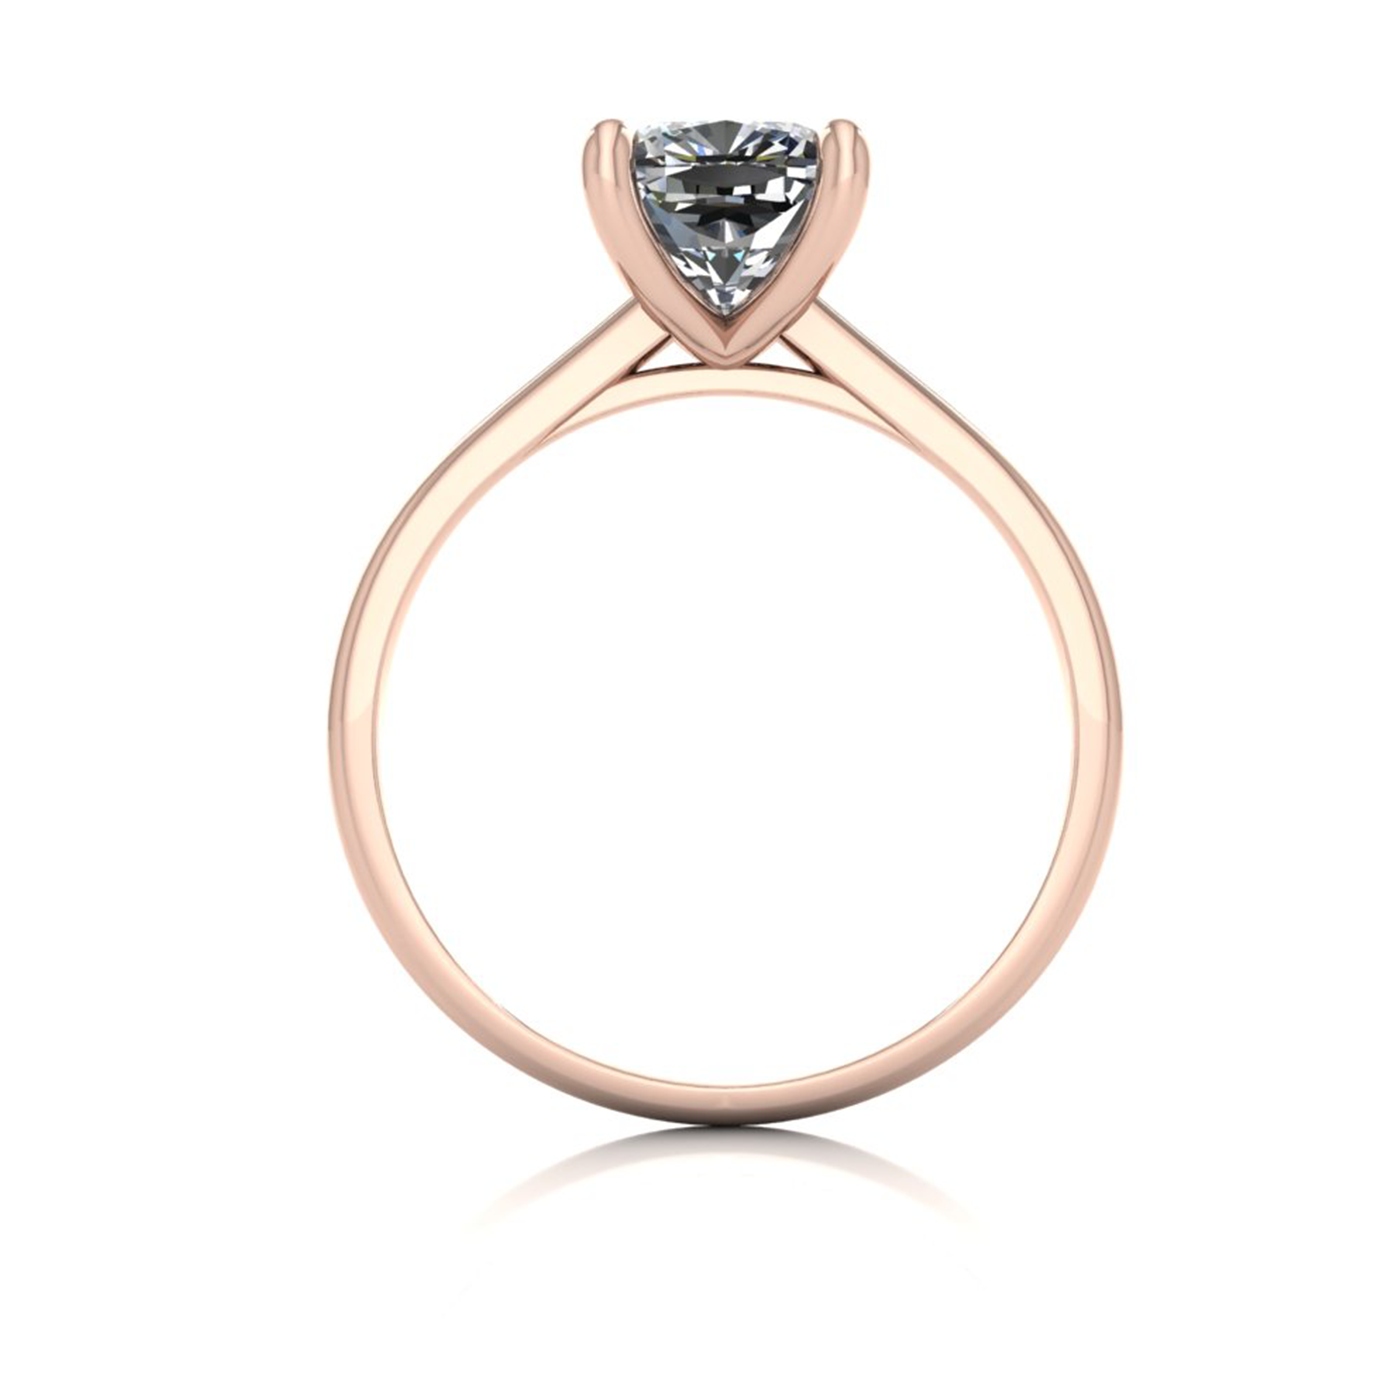 18k rose gold 2.0ct 4 prongs solitaire cushion cut diamond engagement ring with whisper thin band